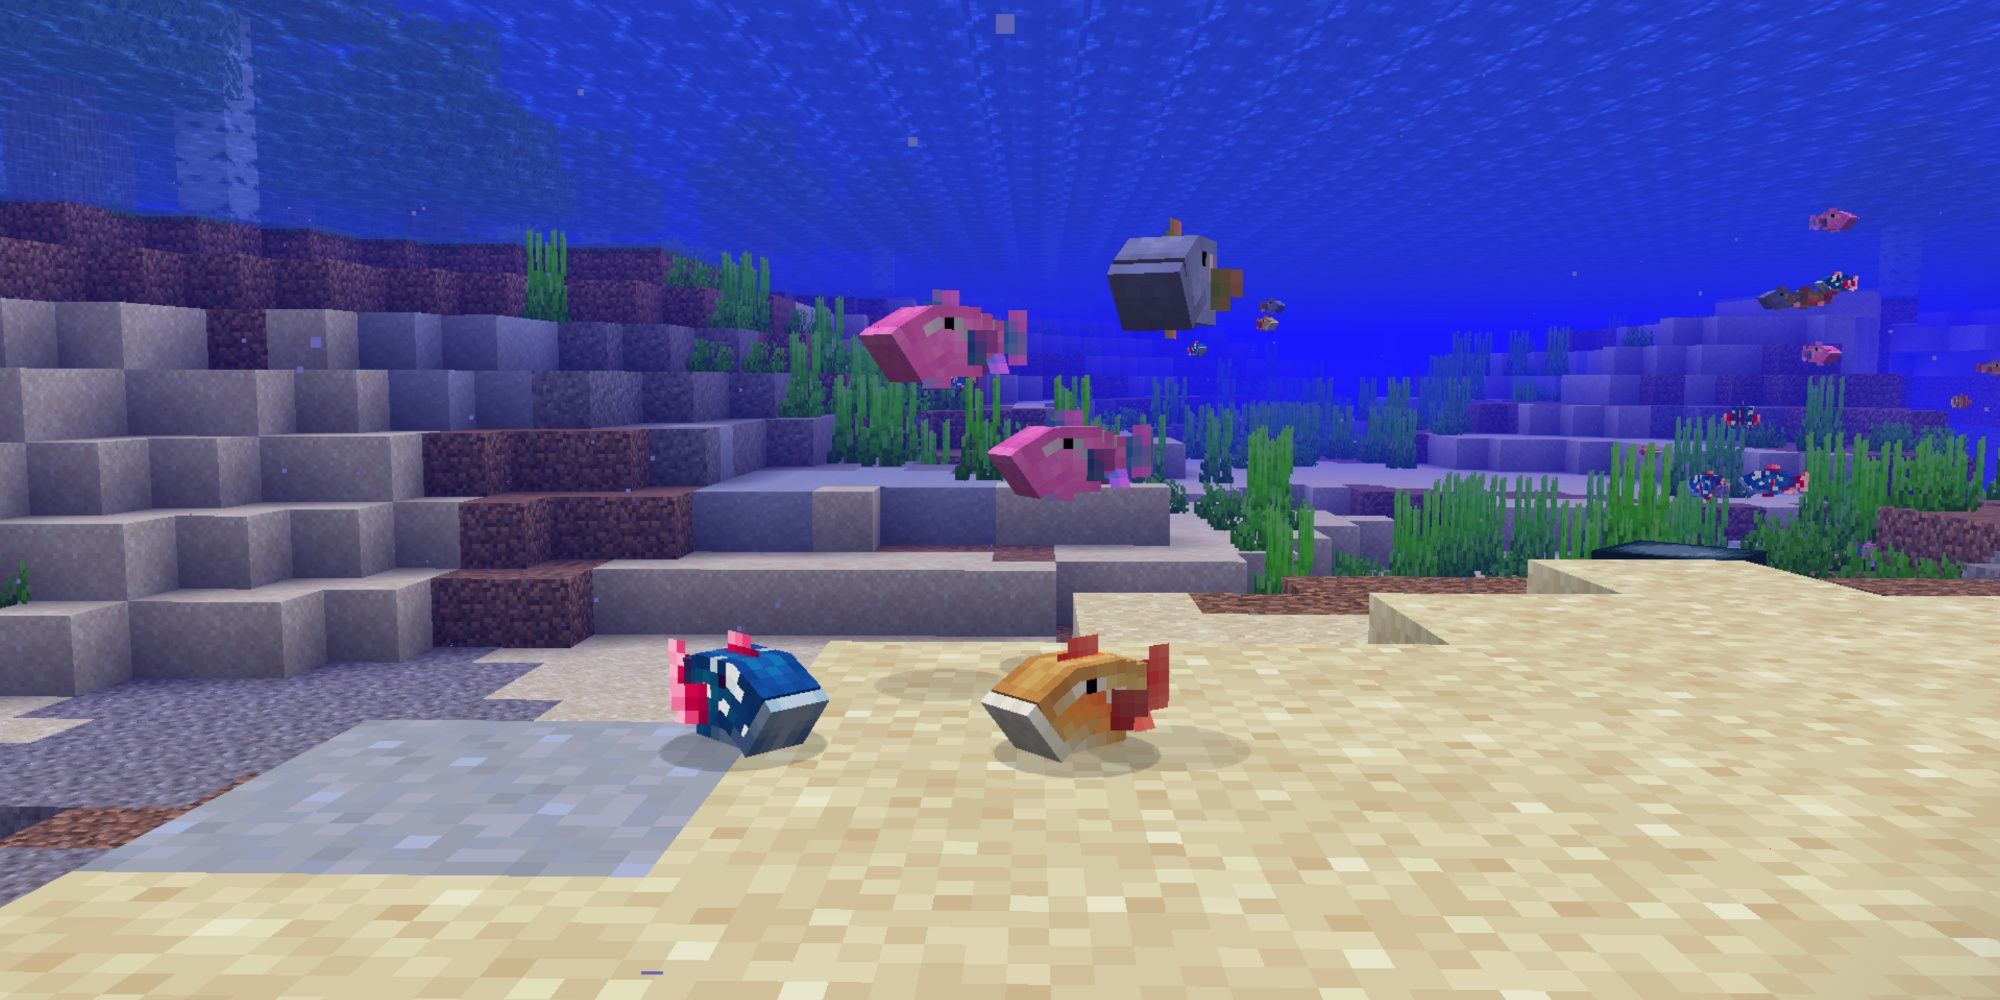 Changes for Oceans in Minecraft - More sea life